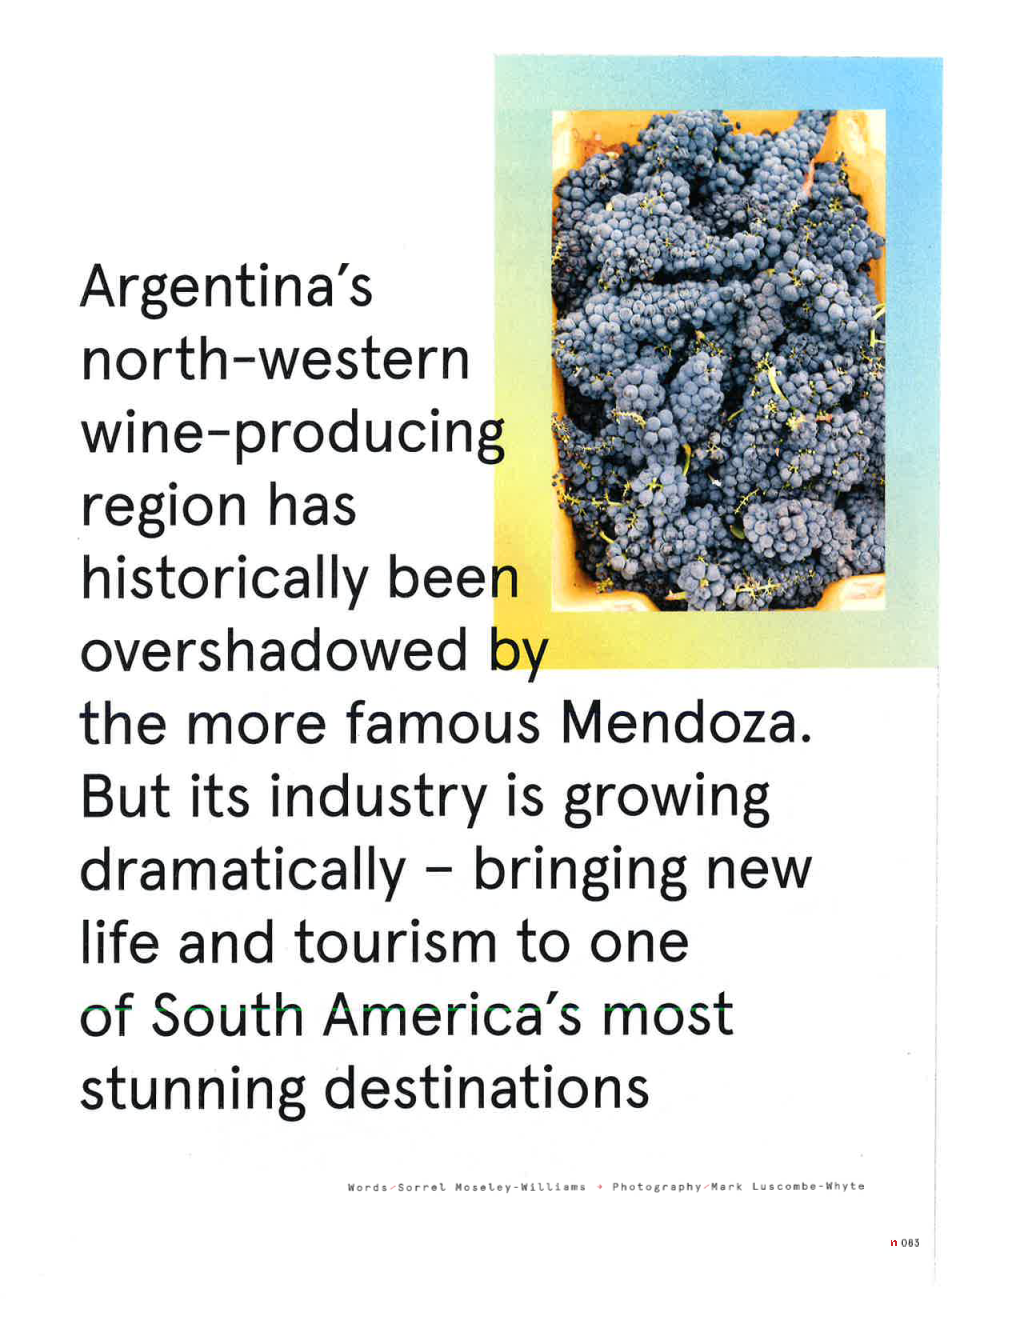 North-Western Wine-Producing Region Has Historically Been Overshadowed Bv the More Famous Mend Oza